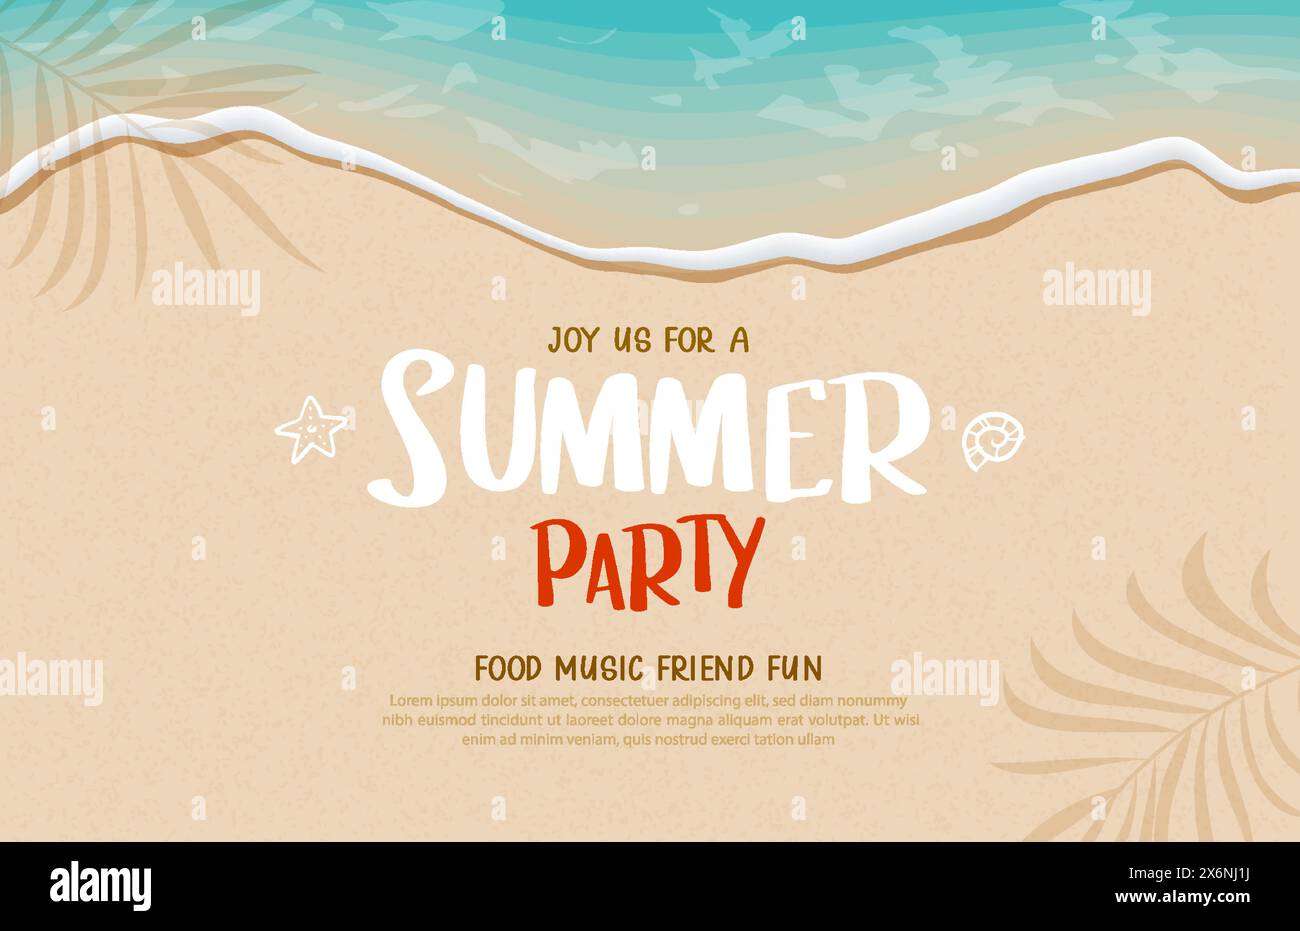 Summer party with soft waves and foam on the sandy beach. Stock Vector